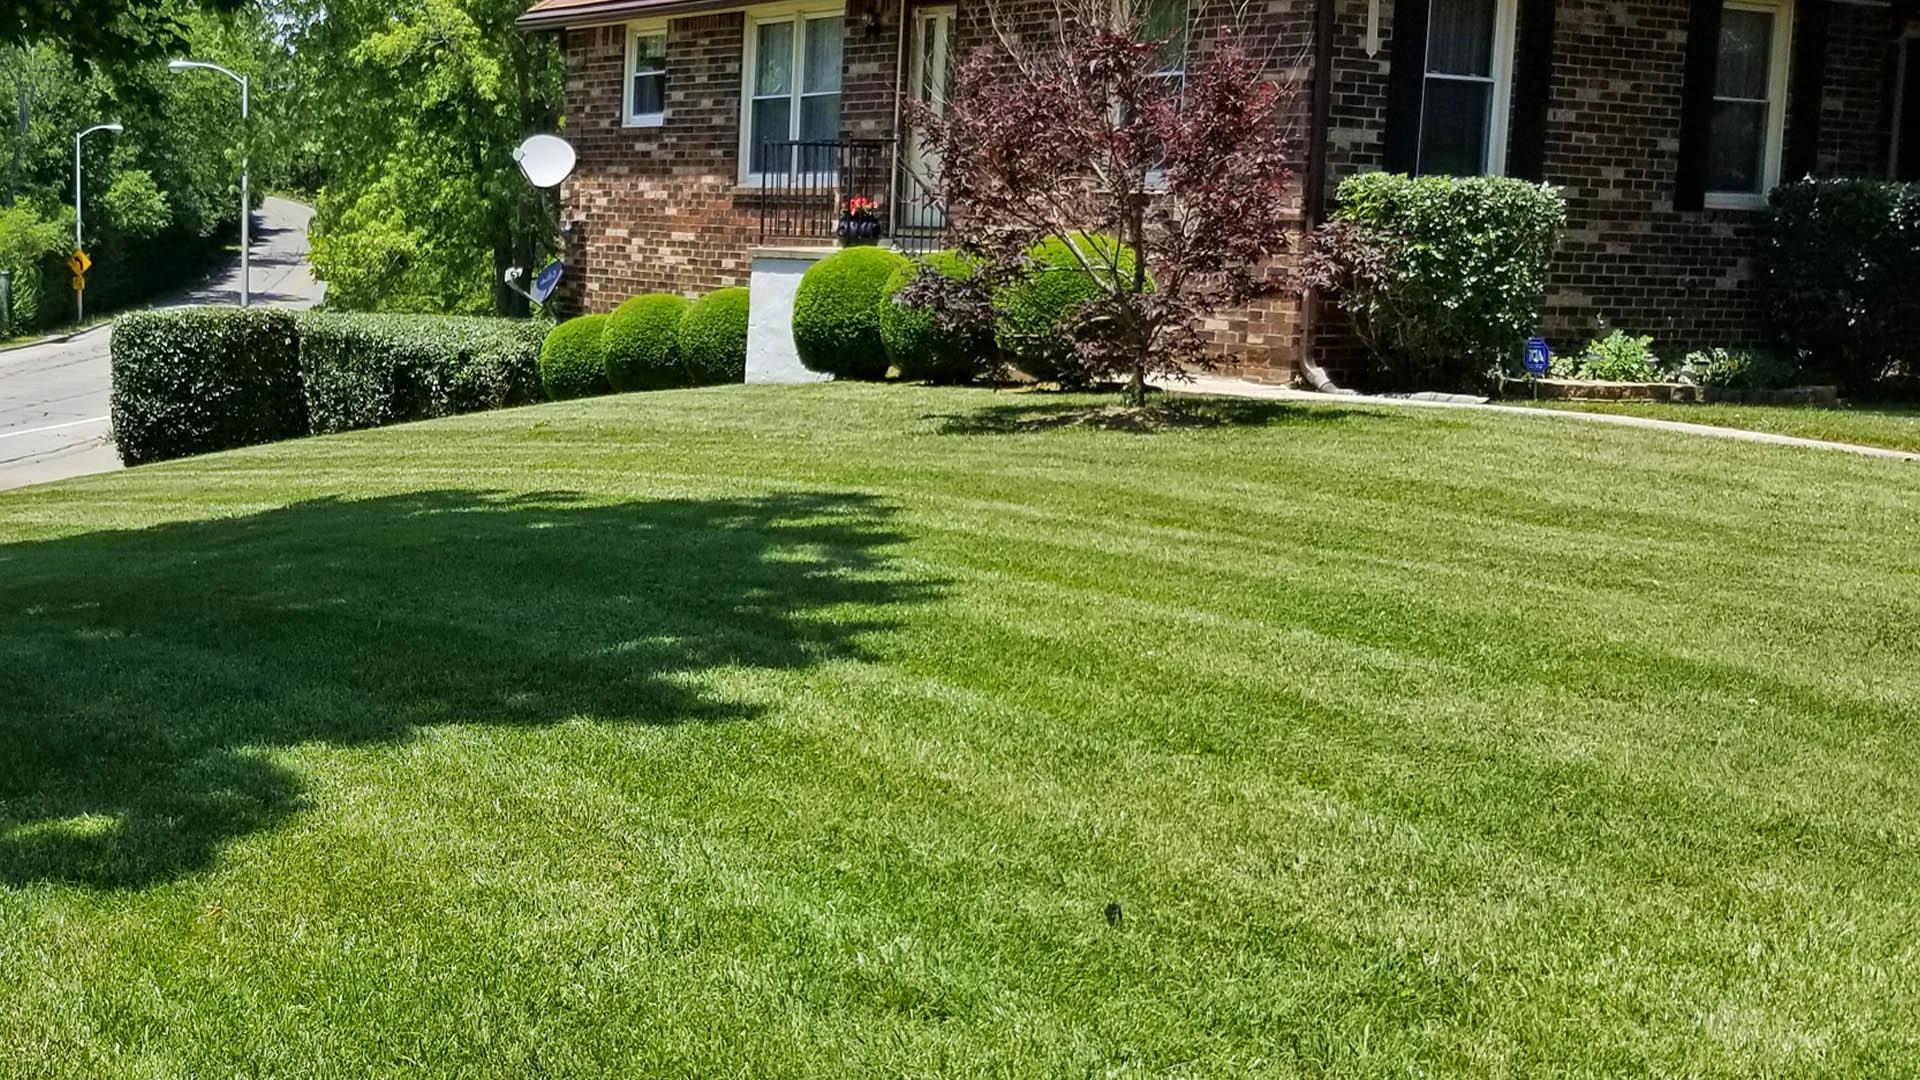 Home with ongoing lawn mowing and maintenance by Allen's Lawn Service in Lexington, KY.